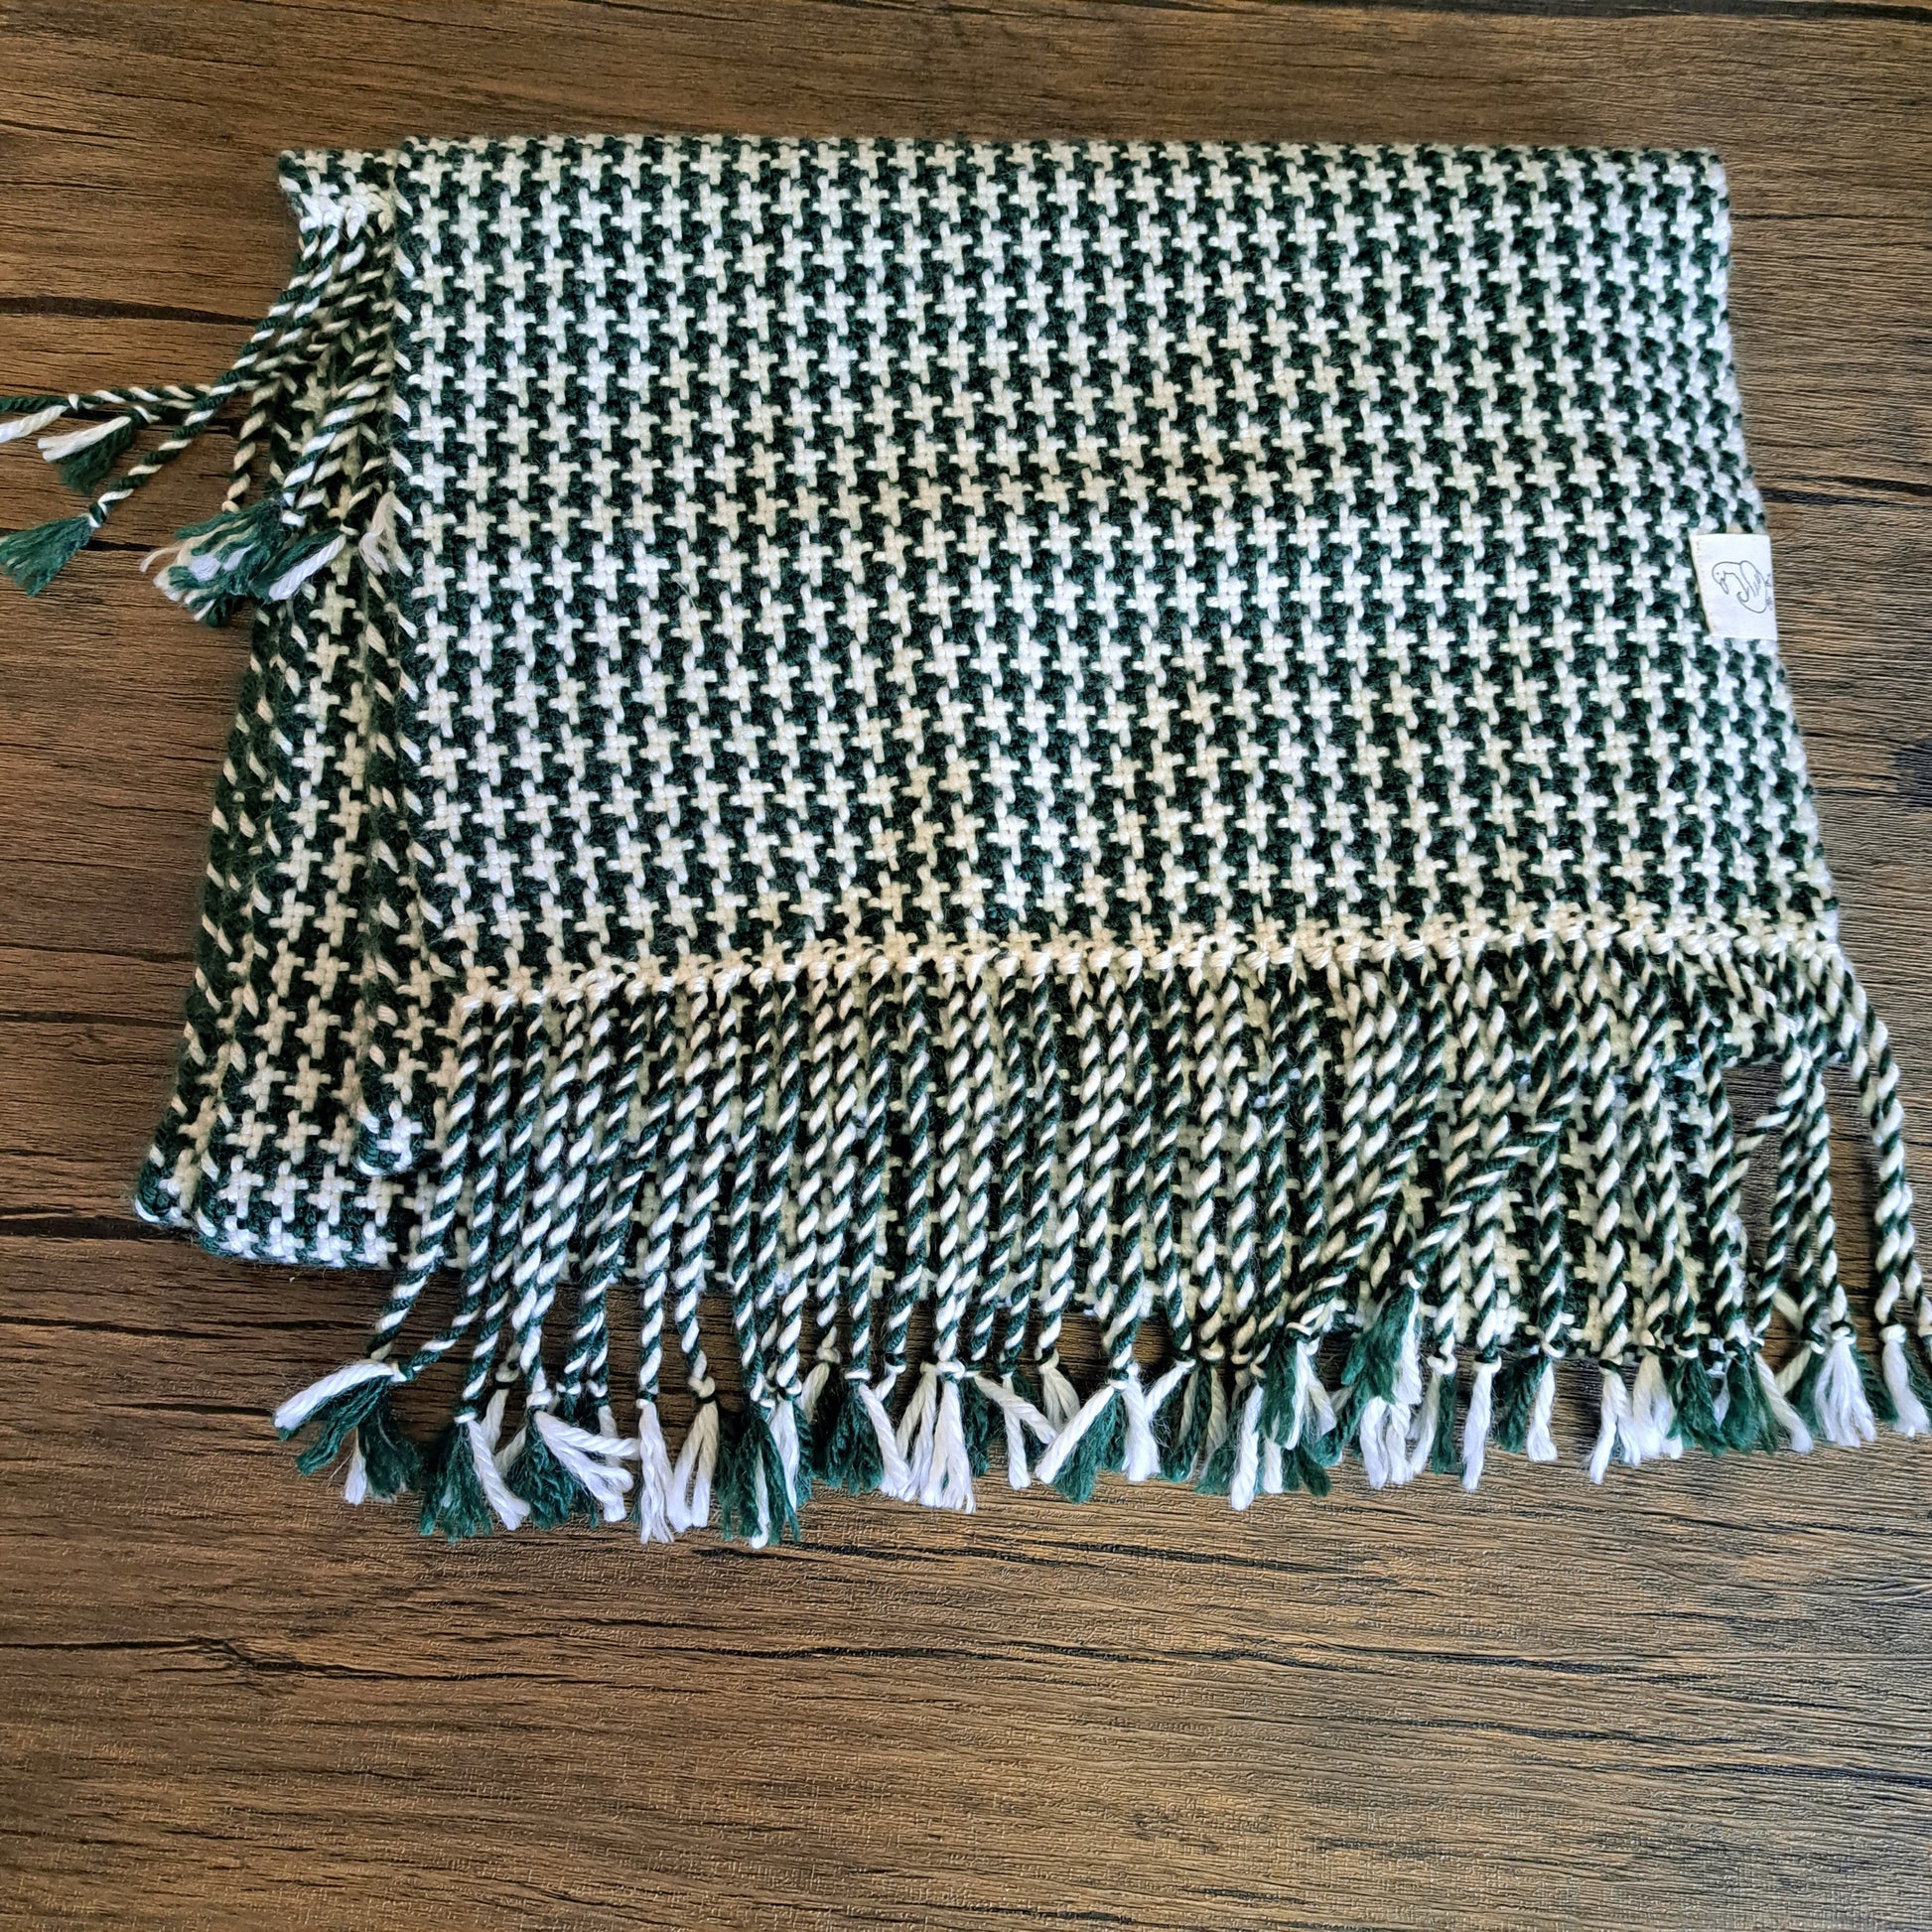 Handwoven Blue-White checks hounds-tooth cotton scarf